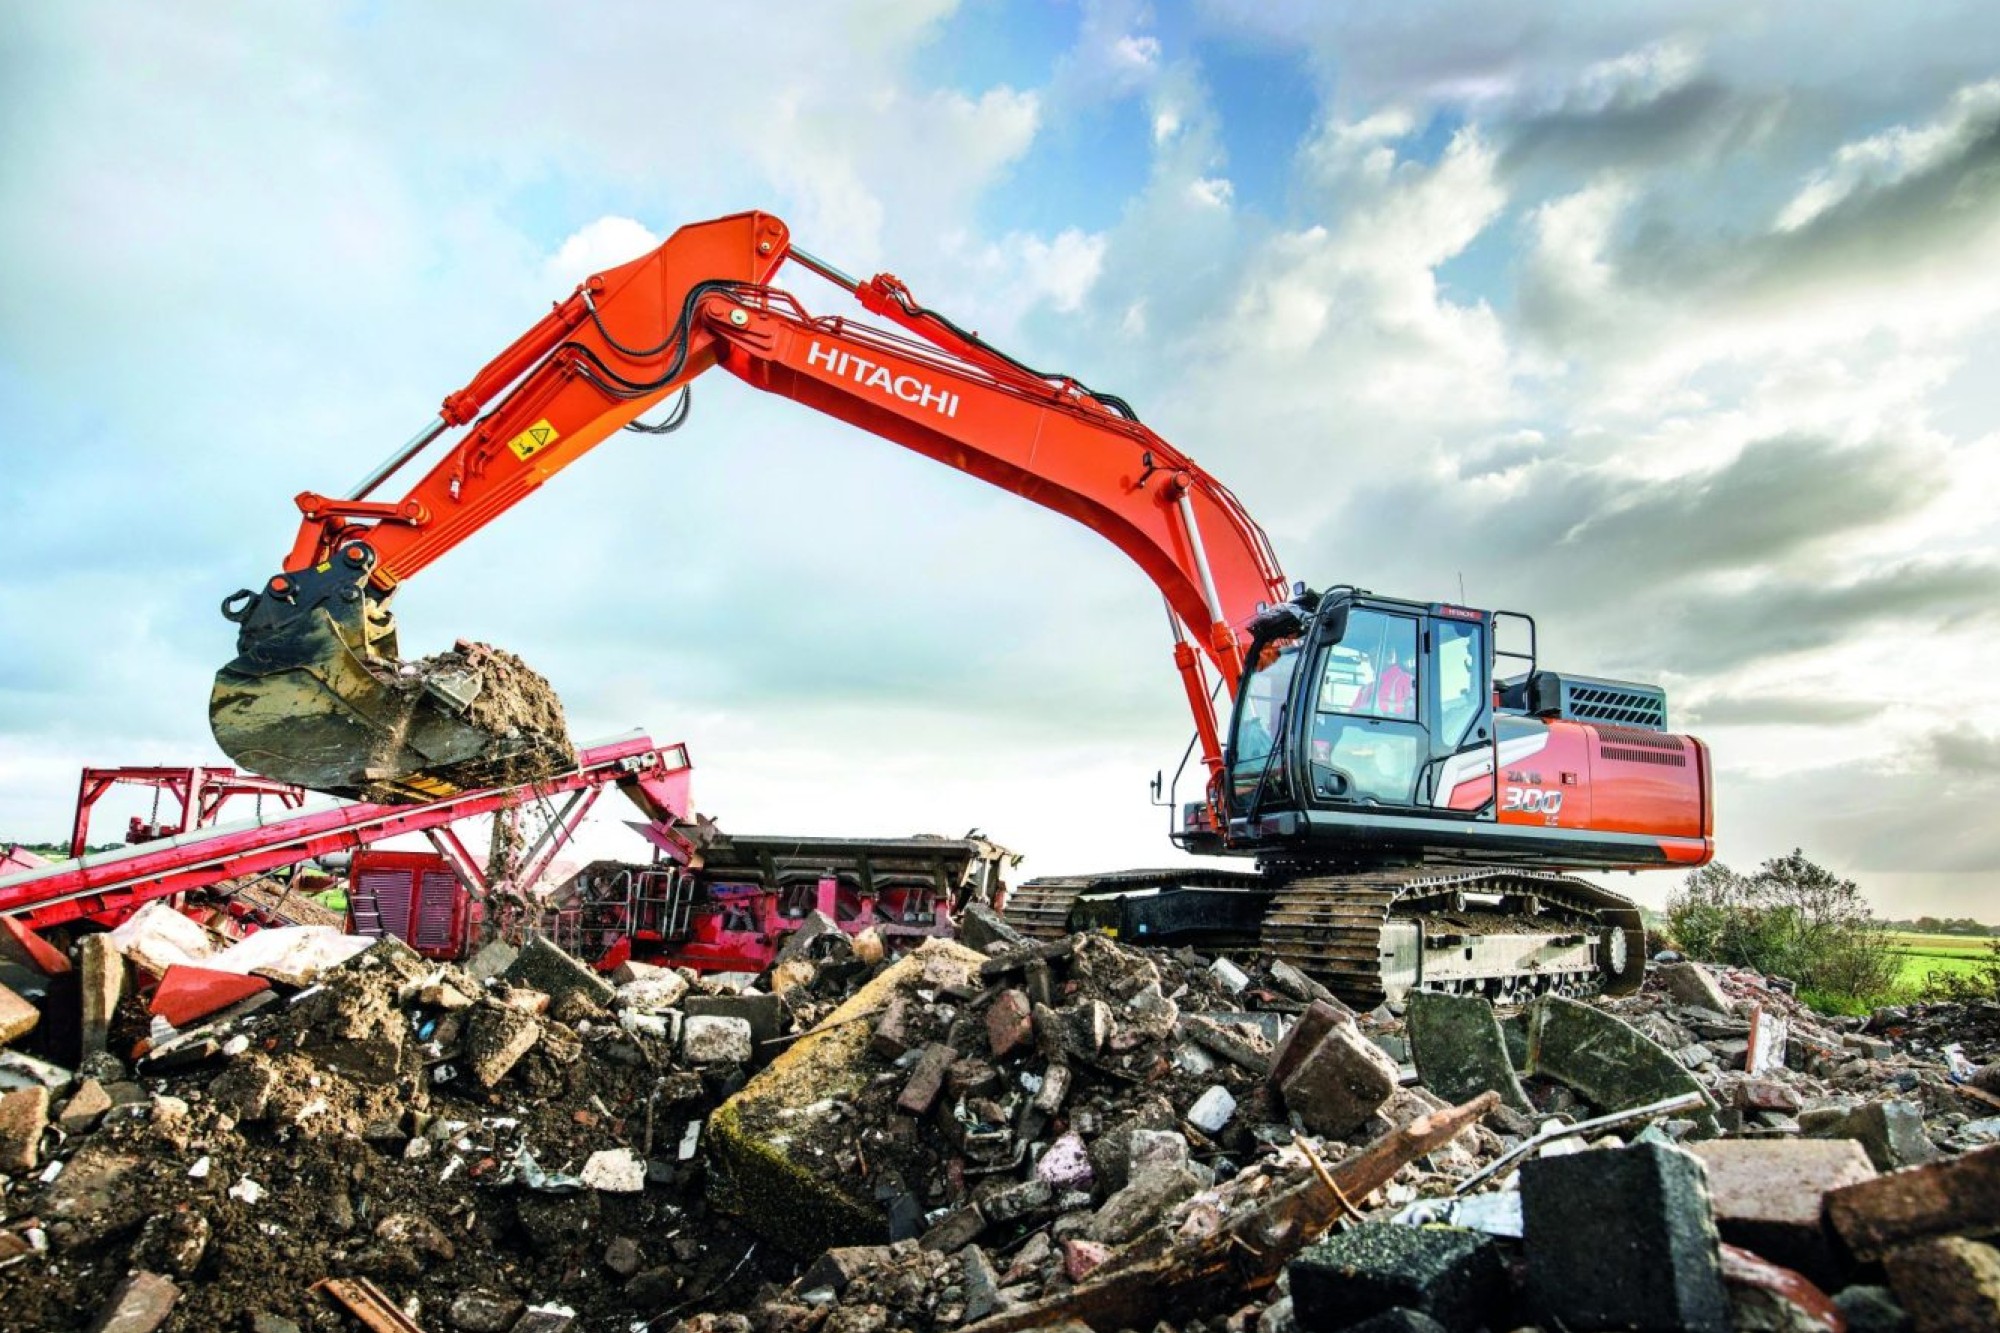 Hitachi Construction Machinery Americas has recently expanded its ZAXIS-7 line of medium and large excavators with the introduction of six new models, namely the ZX250LC-7, ZX300LC-7, ZX350LC-7, ZX490LC-7, ZX690LC-7, and ZX890LC-7.